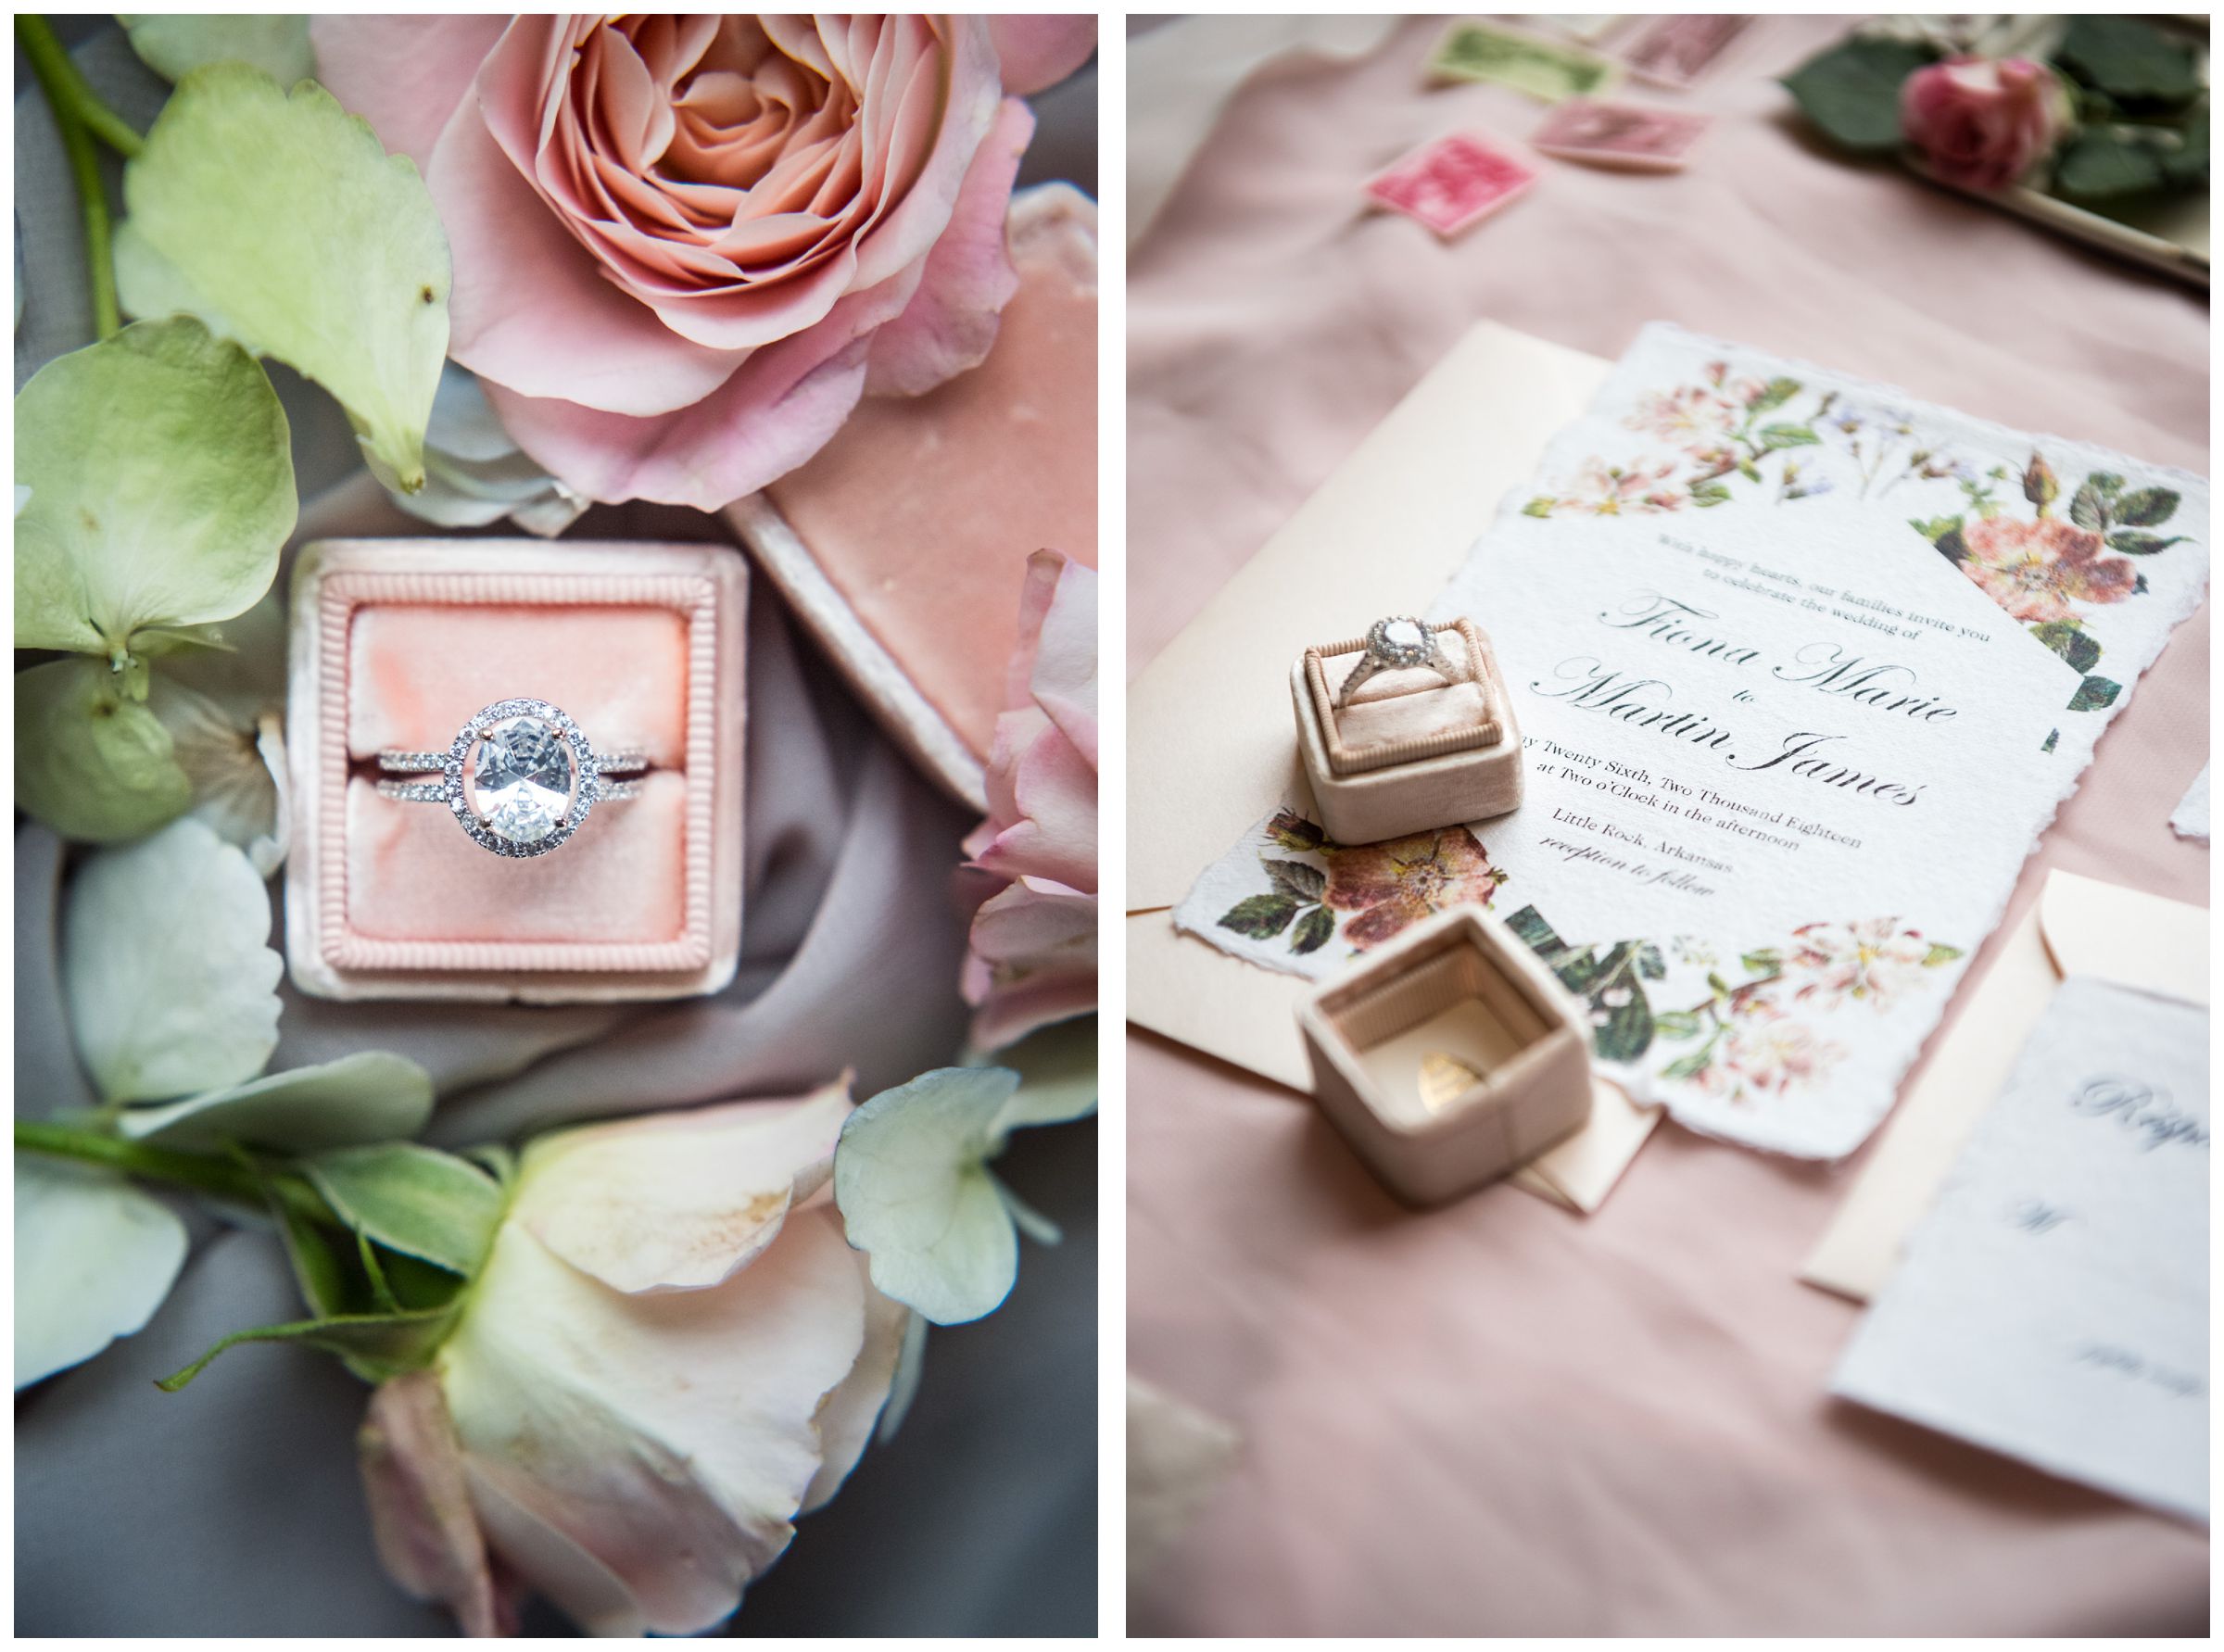 engagement ring in pink box and wedding invitation stationery suite with pink flowers